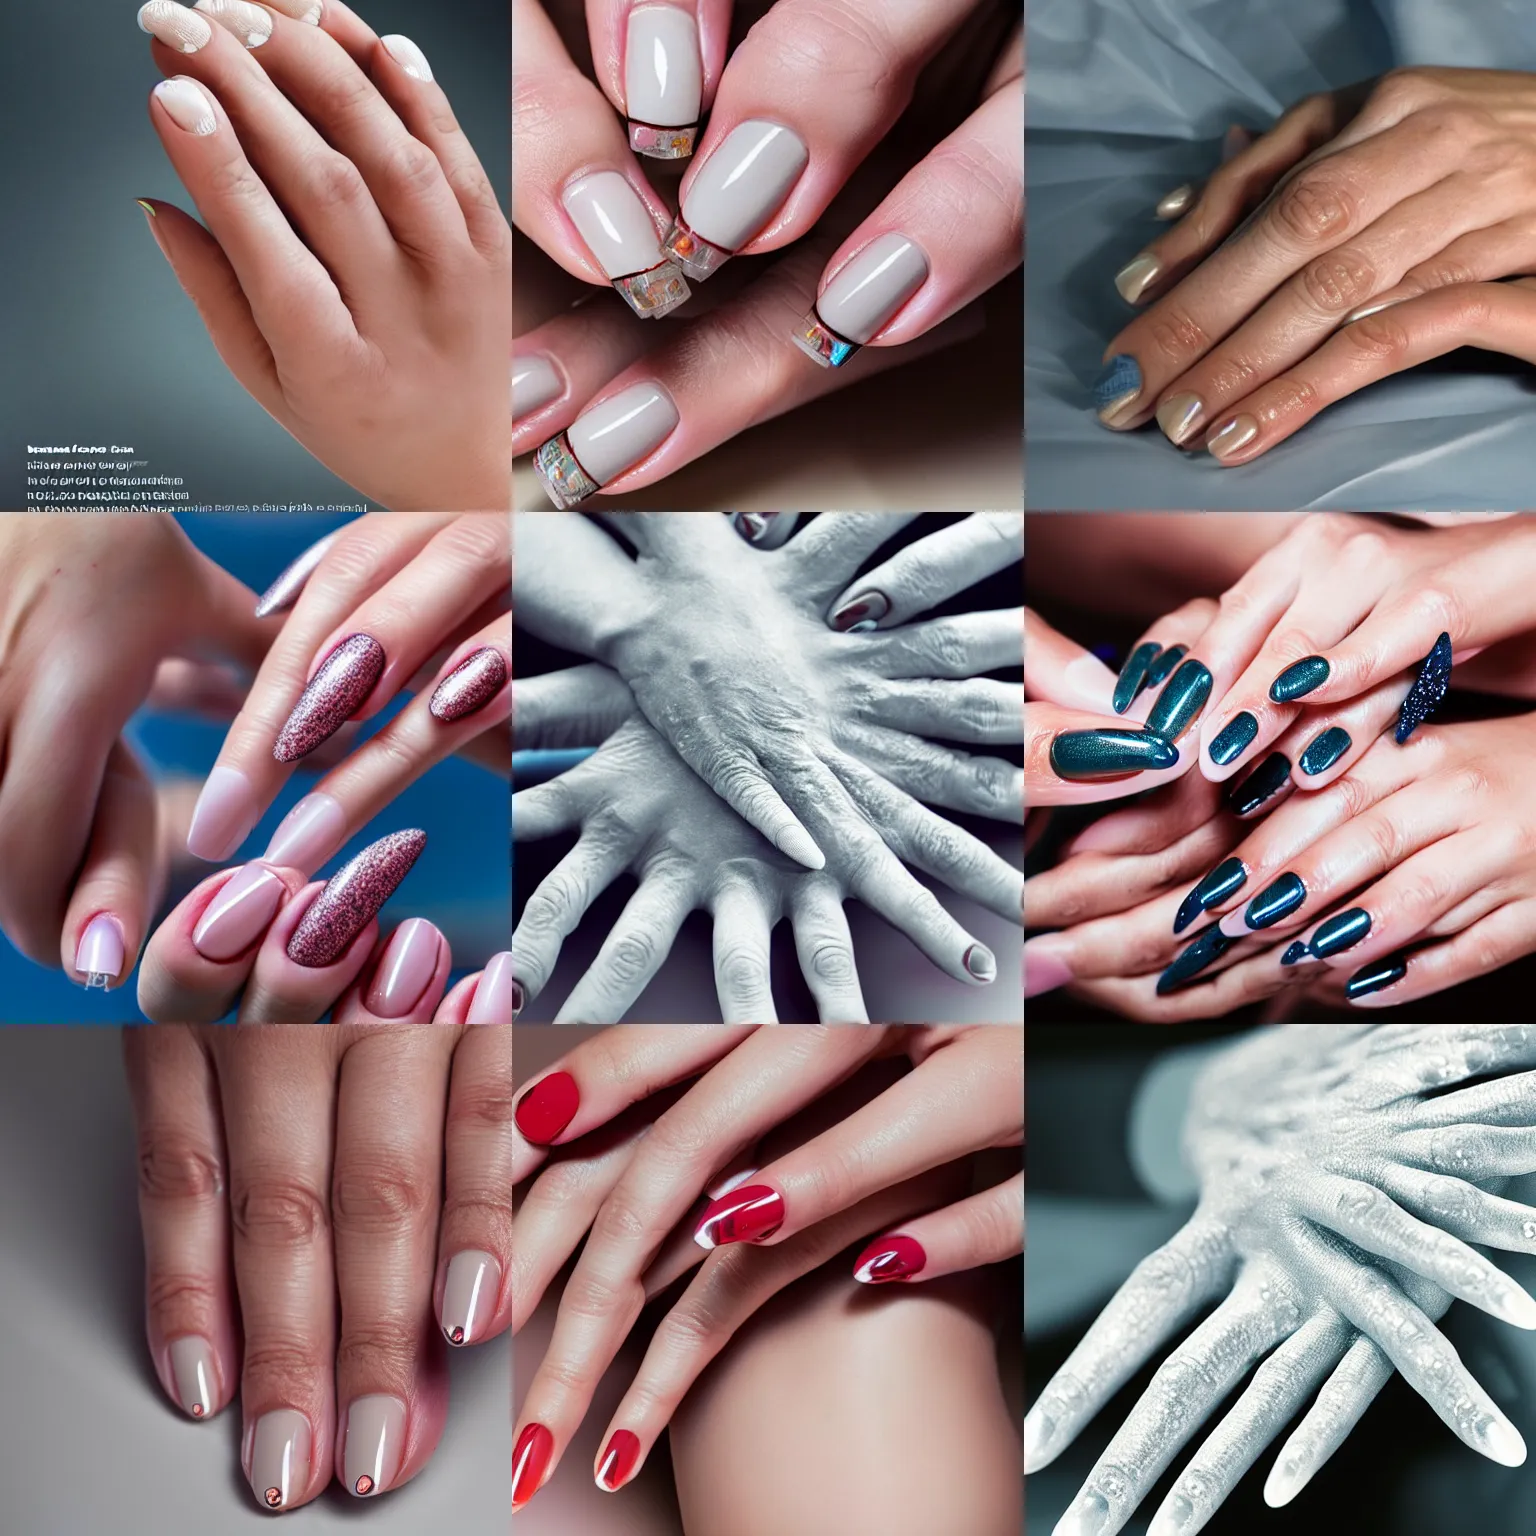 Prompt: beautiful extreme closeup frontpage photo of frontiers in medical hand manicure science magazine photo of hand, highly detailed, focus on highly detailed nails, soft lighting